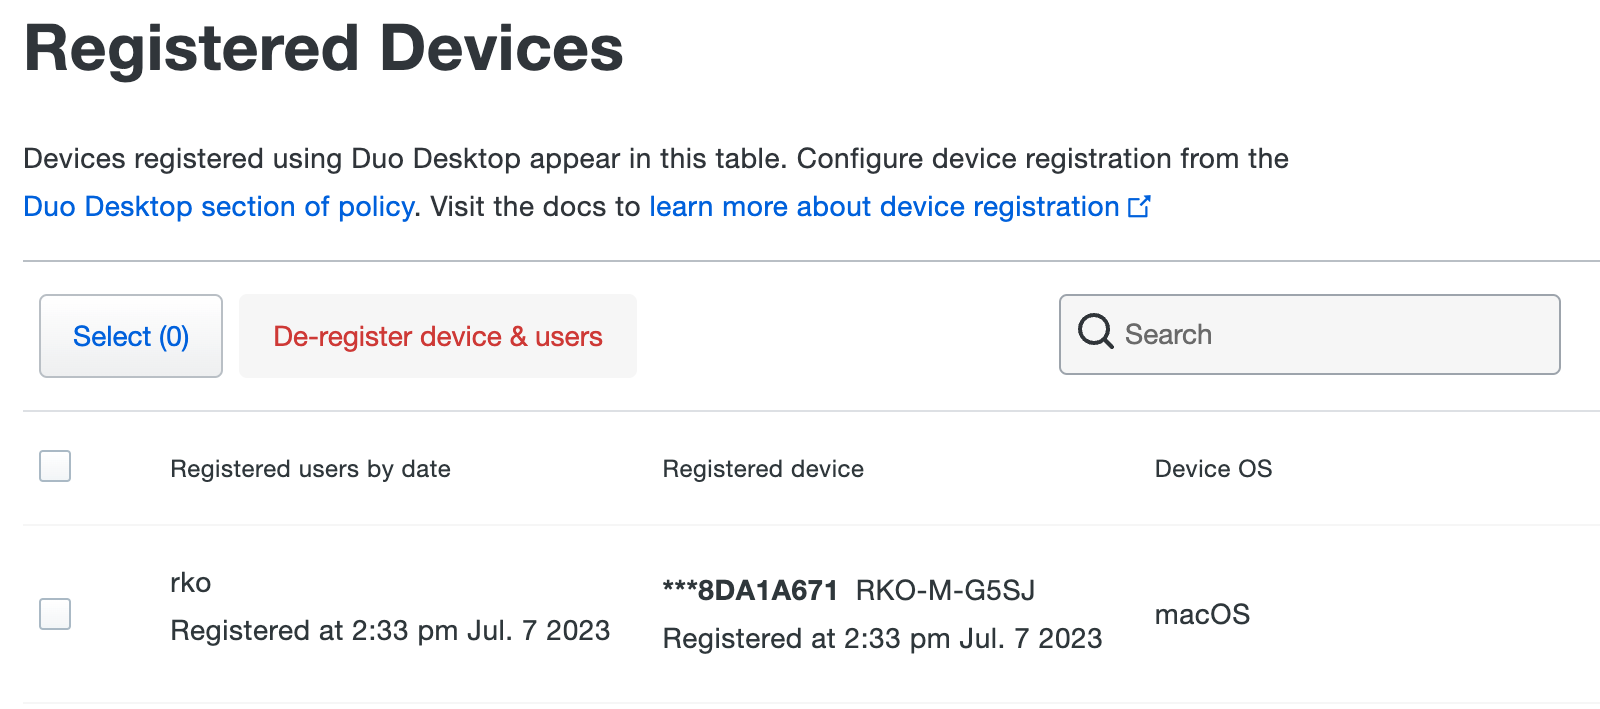 Registered Devices